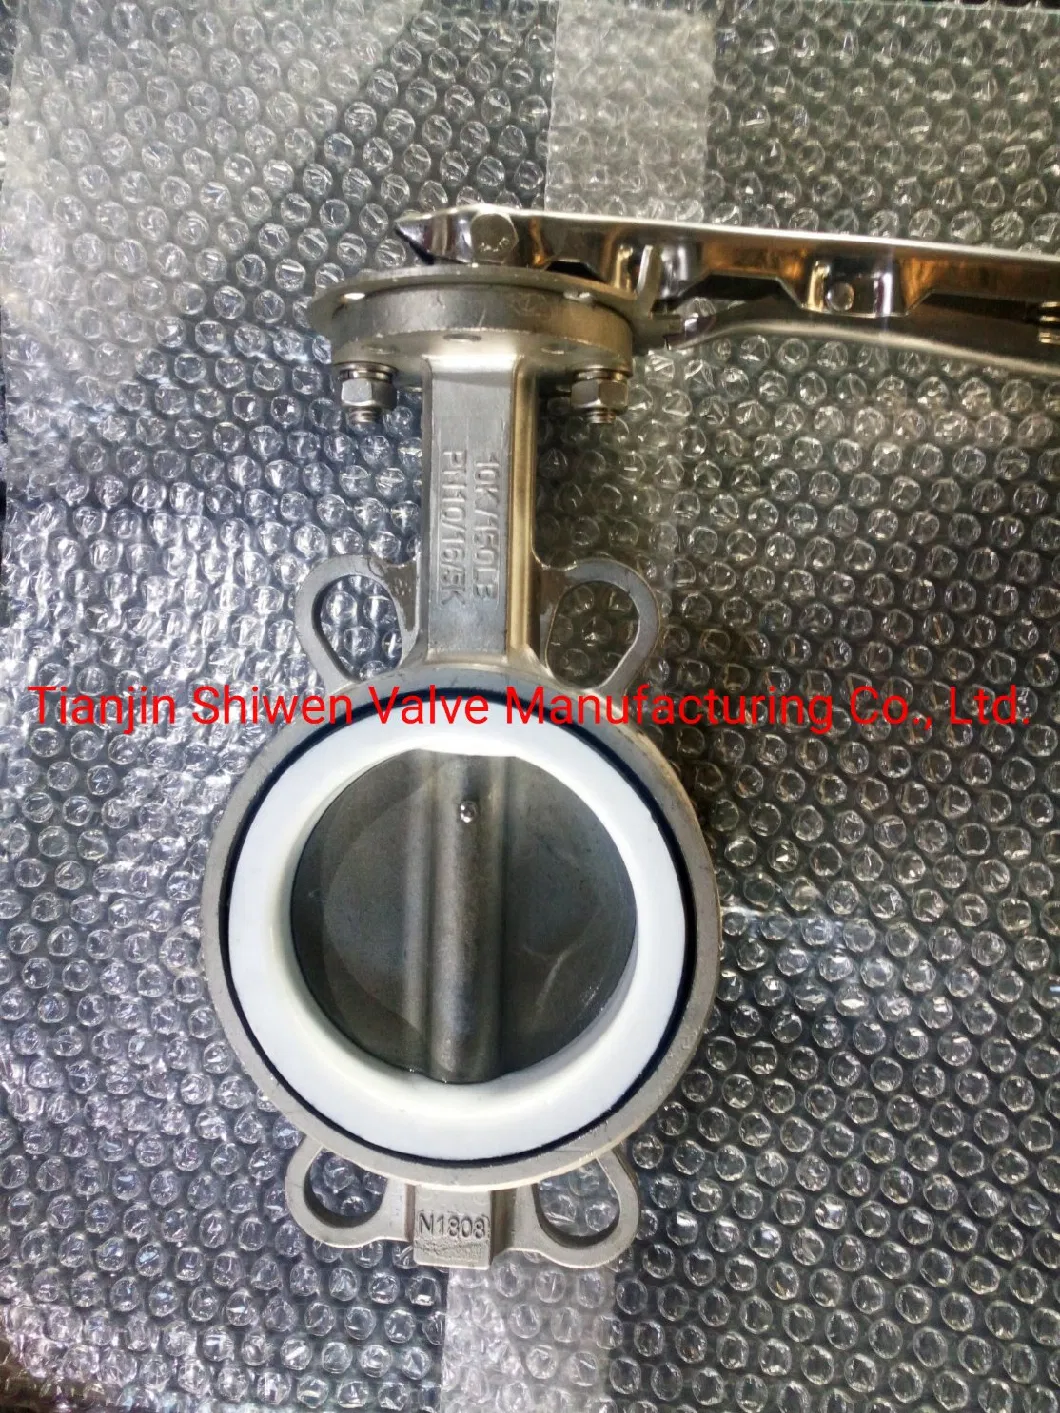 API 150lb Full Stainless Steel Wafer Butterfly Valve with Gear